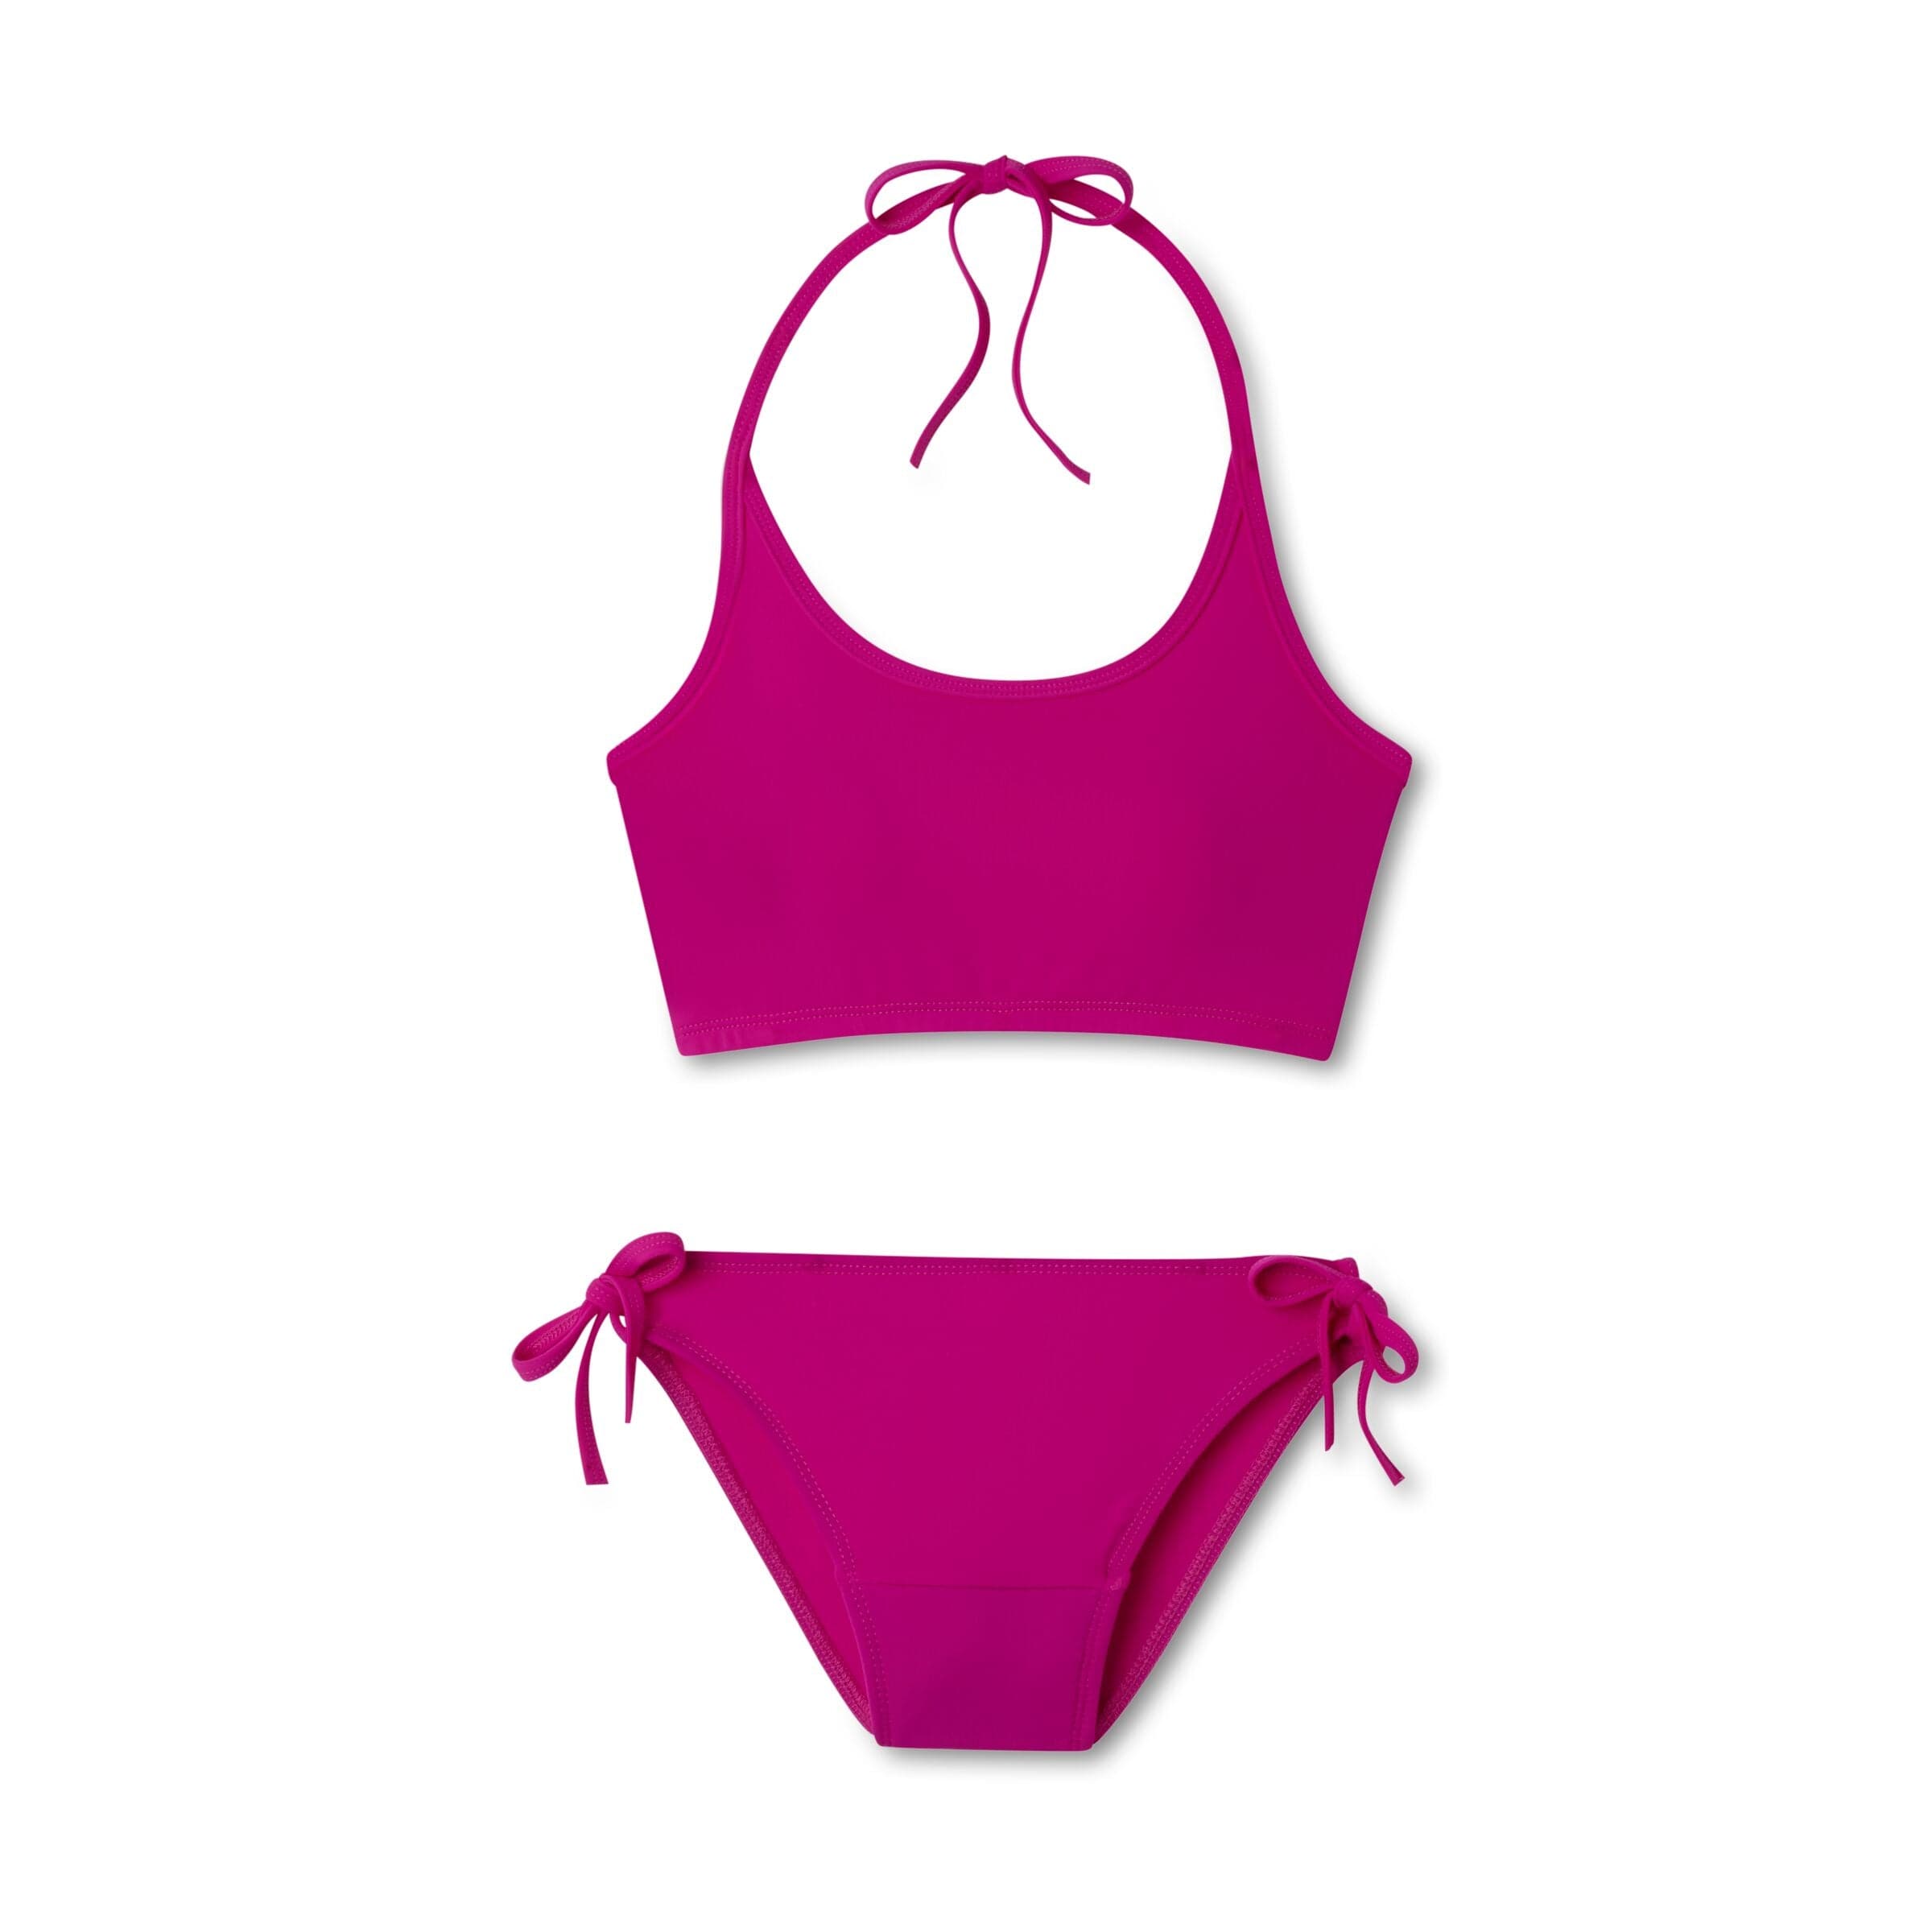 Our leak-proof swimwear provides you with all-day protection from